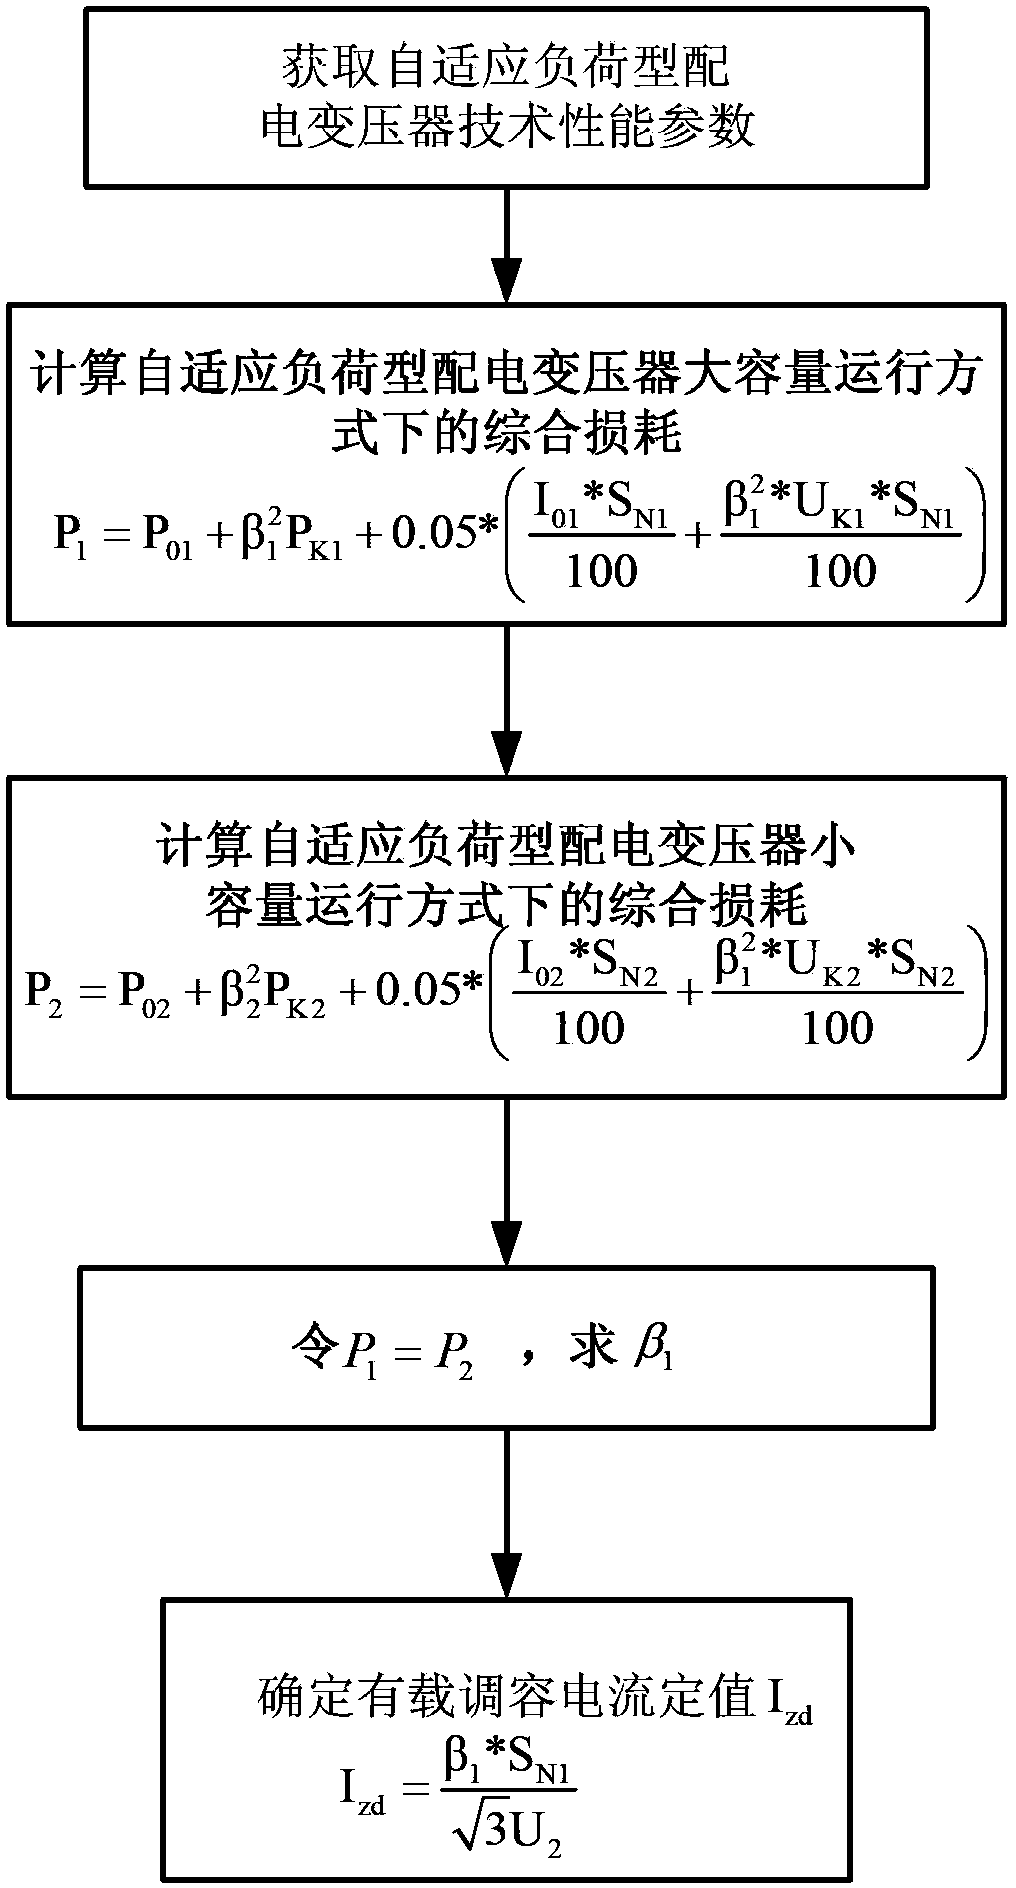 Realization method for function of adaptive load type distribution transformer